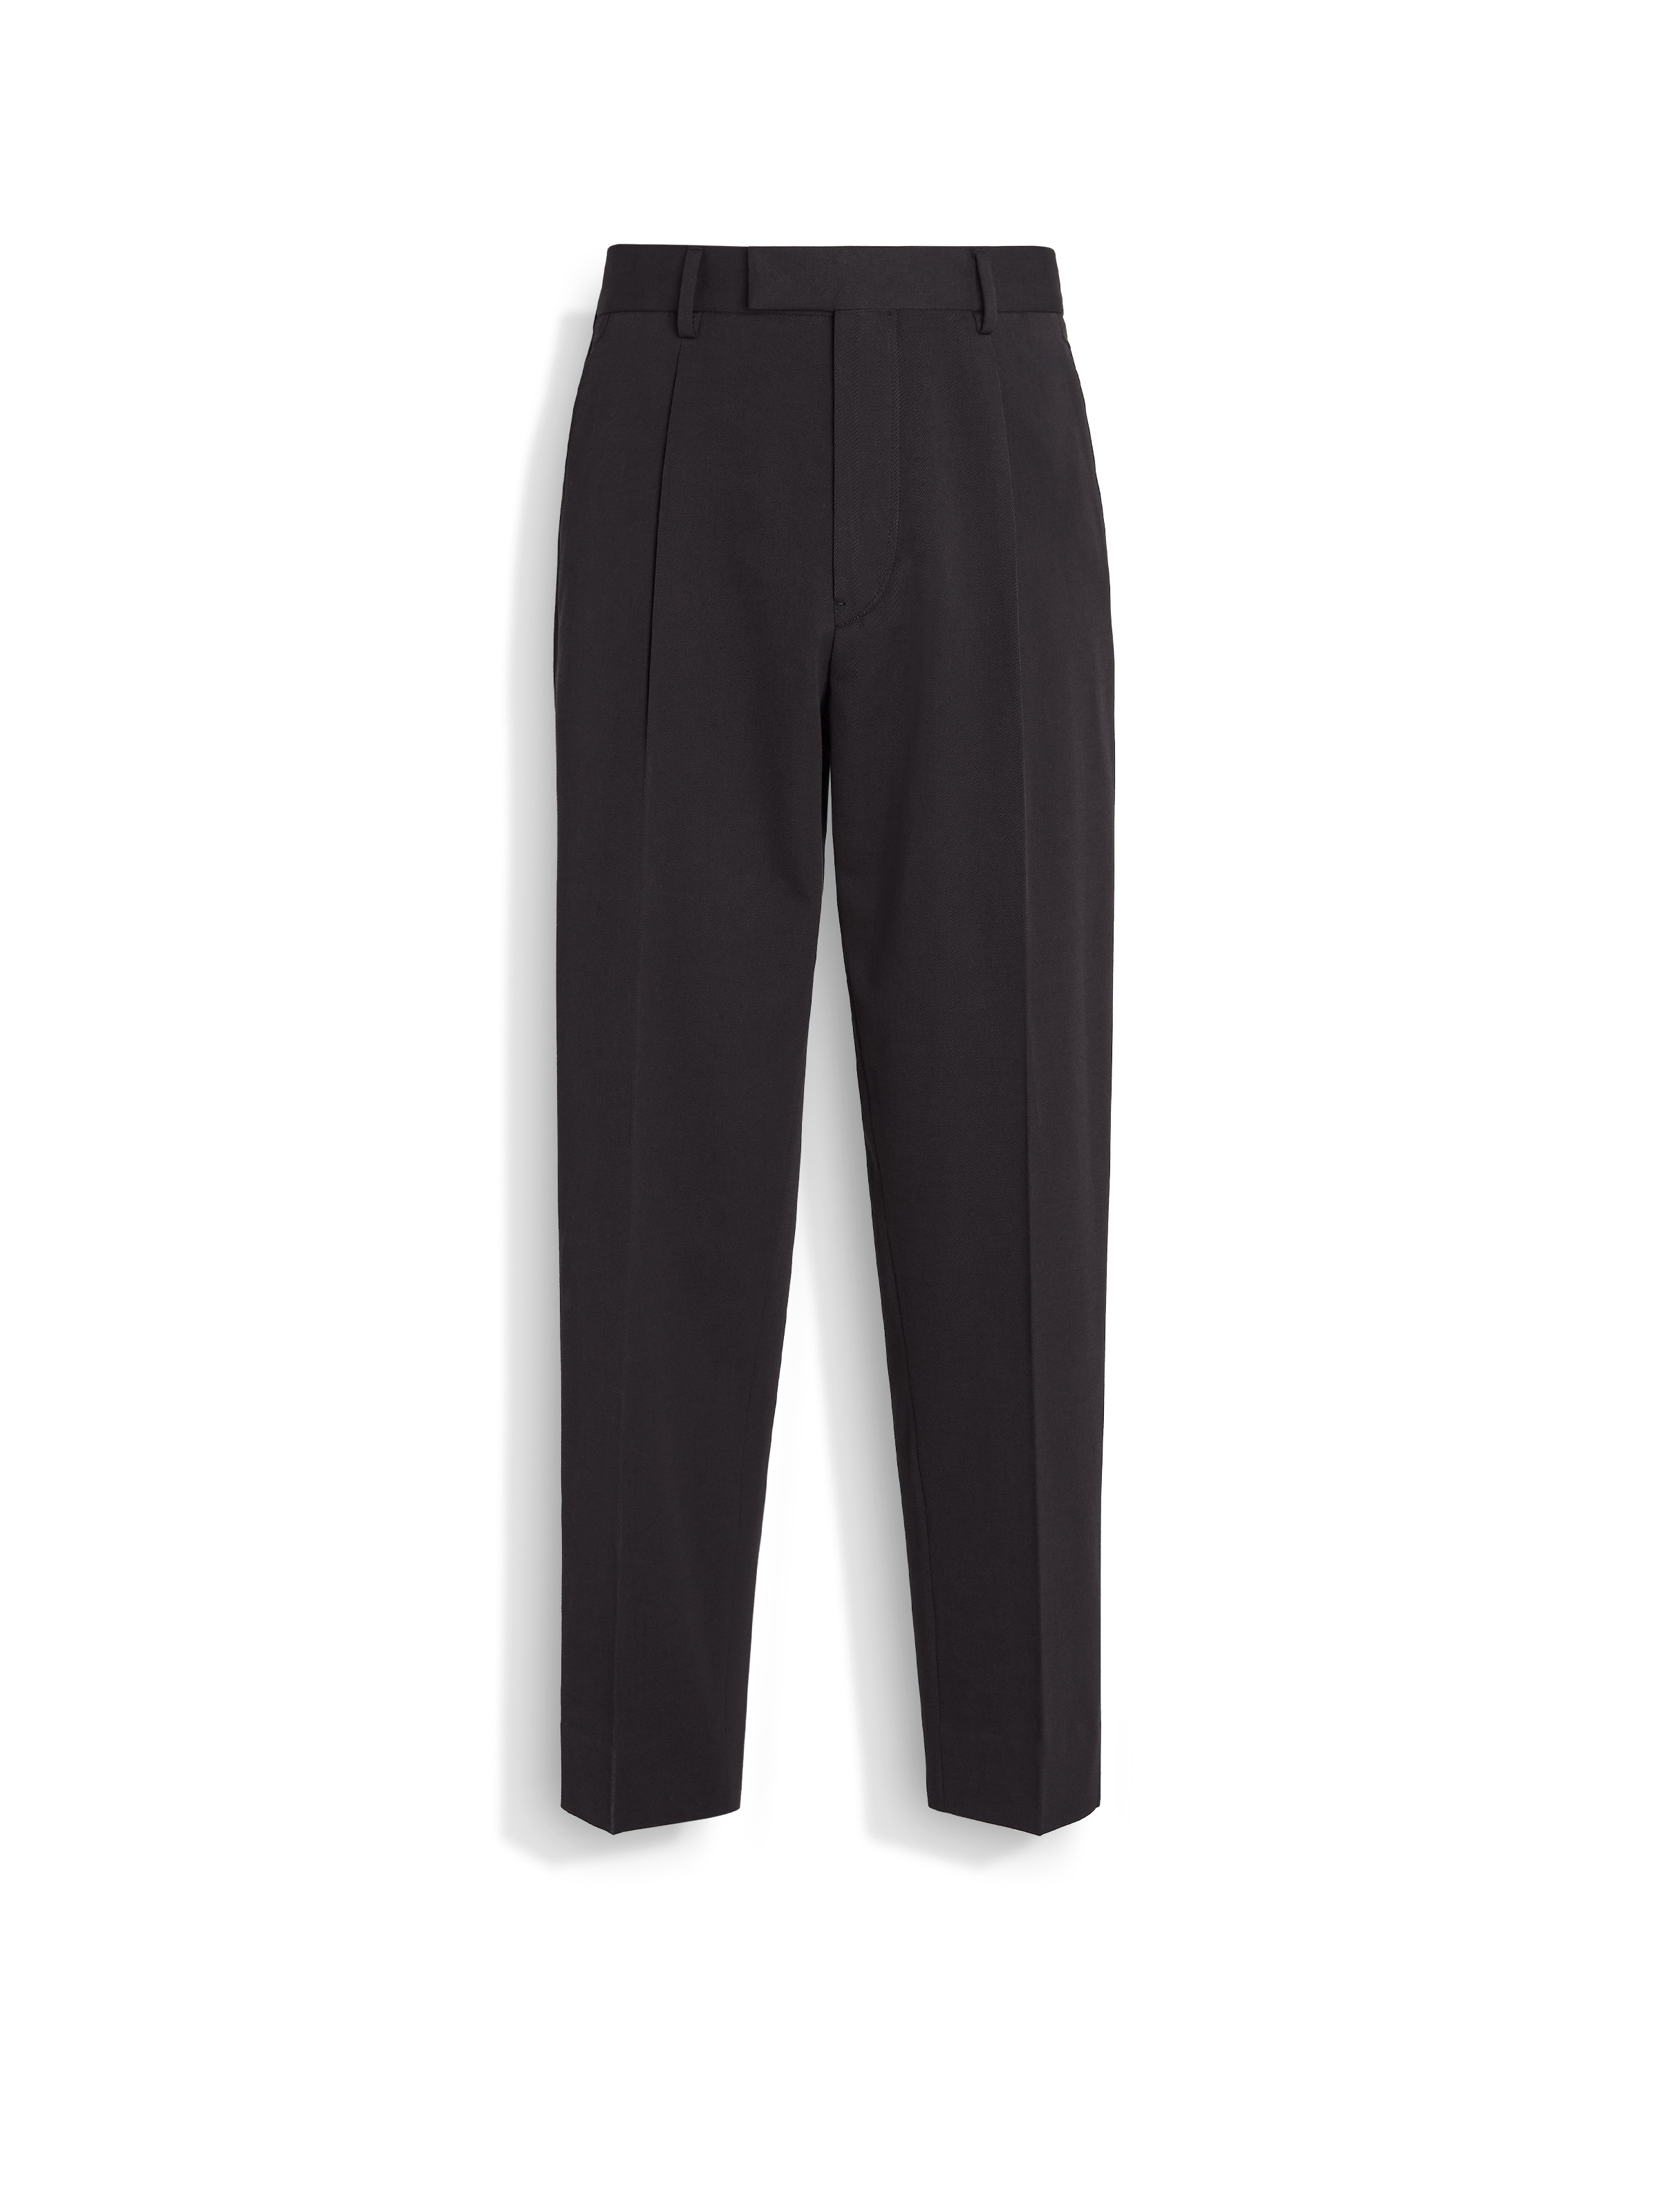 Shop Zegna Dark Brown Cotton And Wool Pants